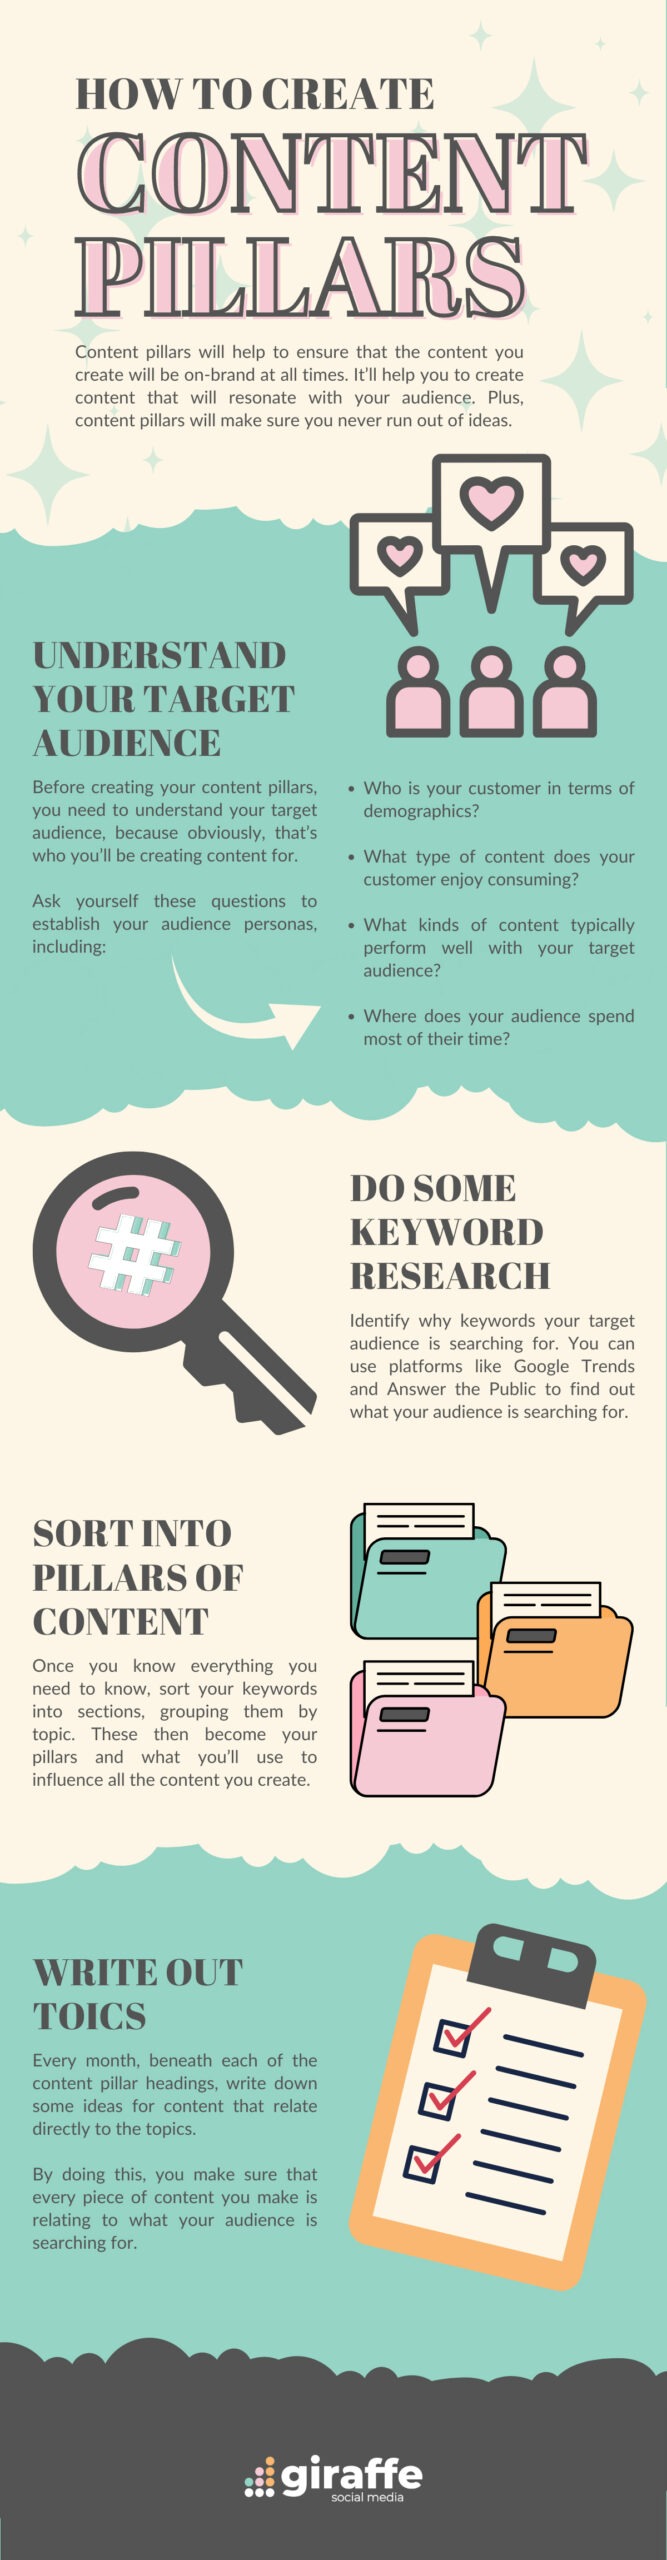 The Content Pillars Infographic